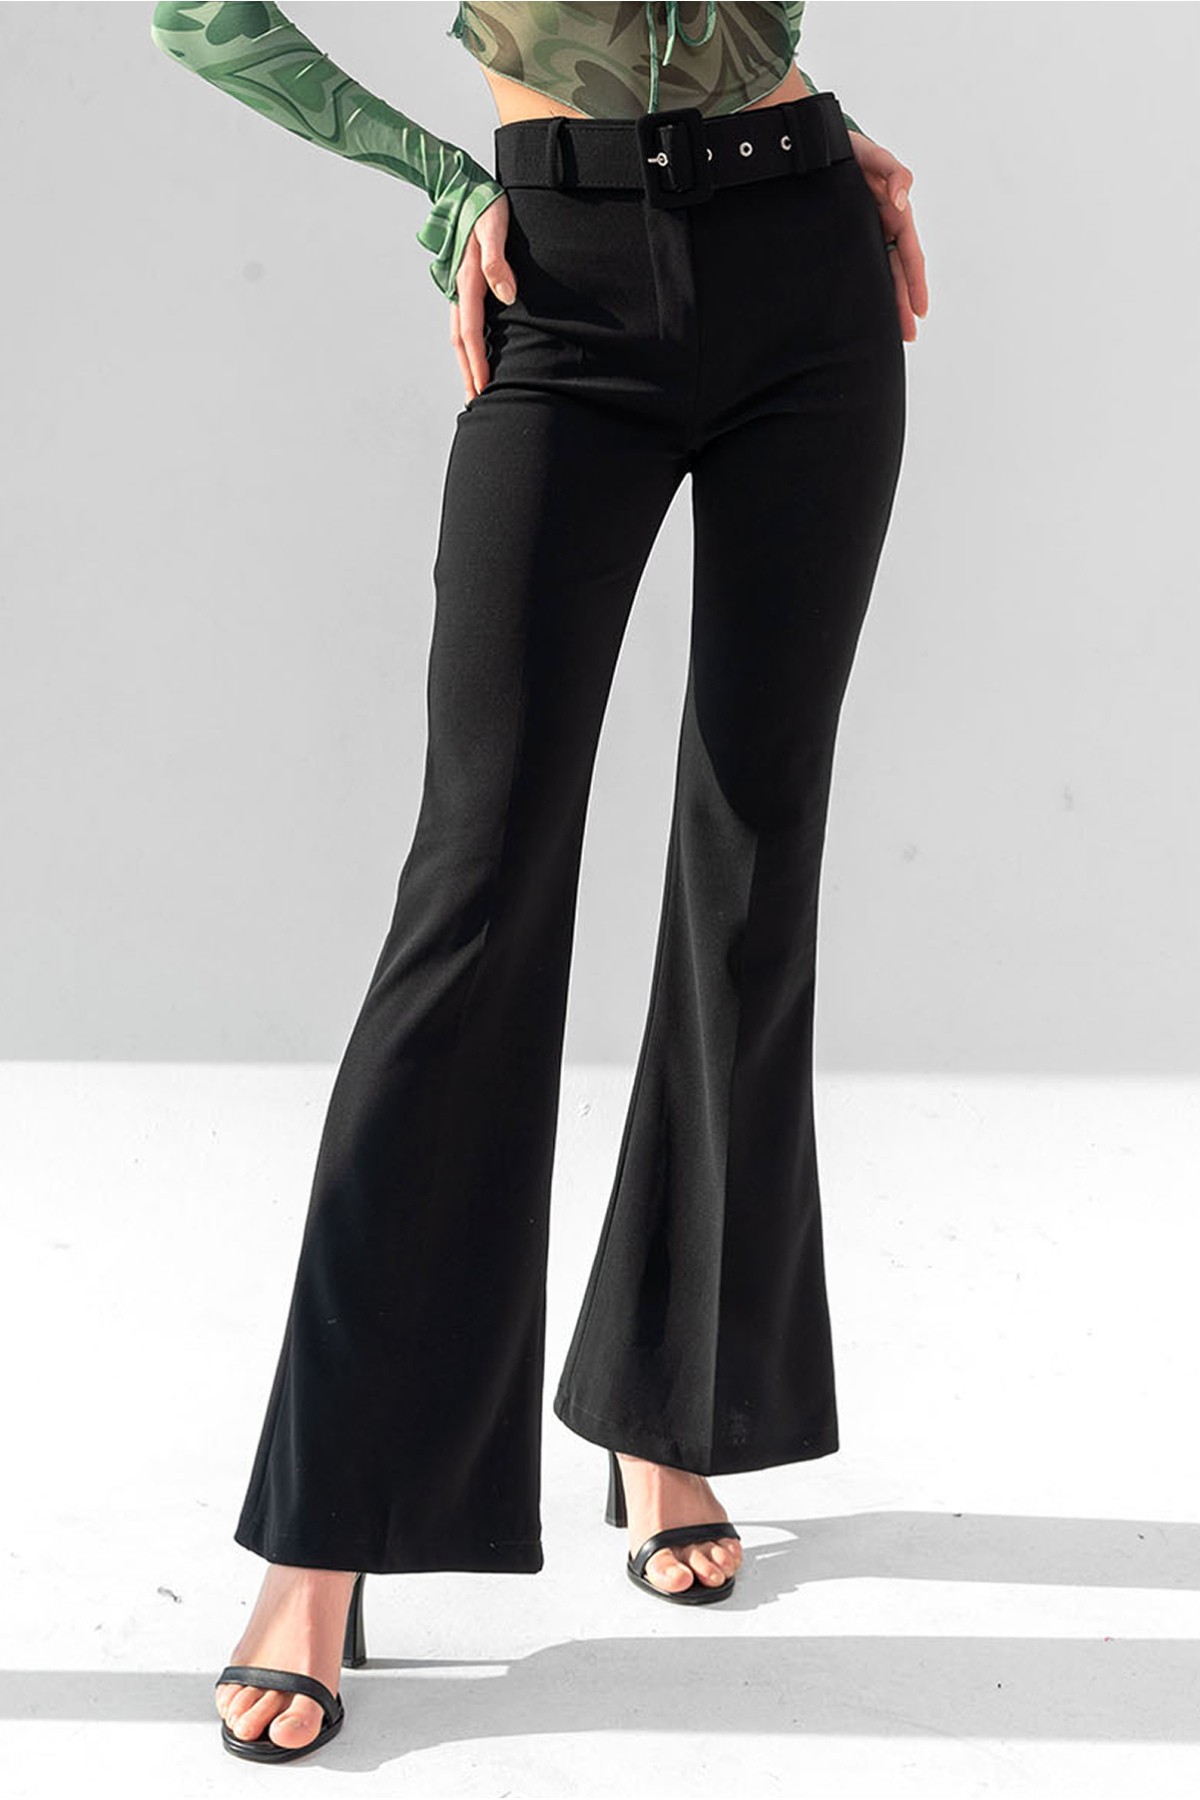 Women's Belted High Waist Flared Trousers - Black